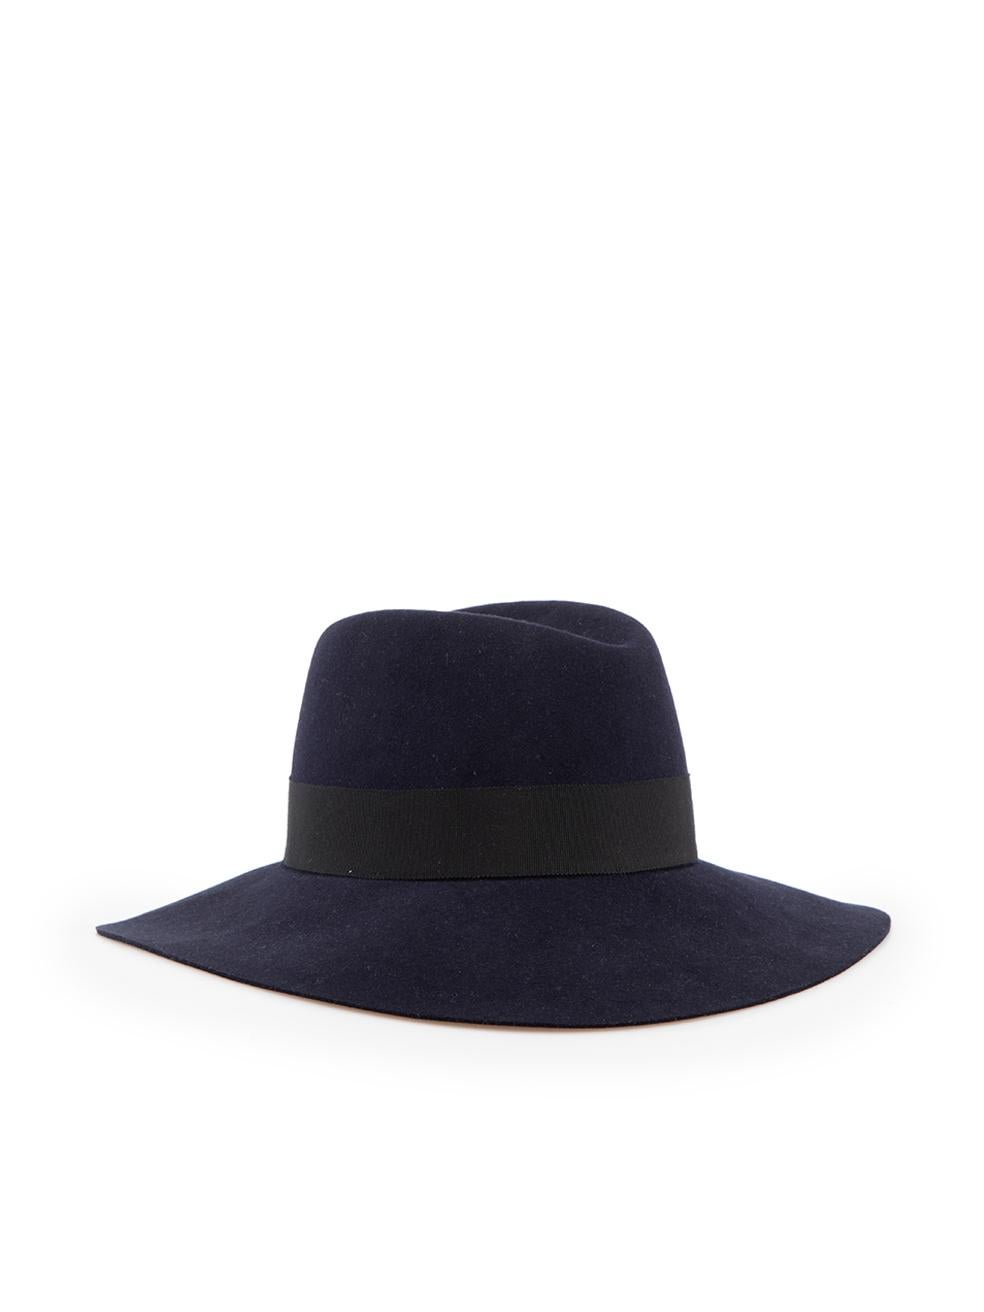 CONDITION is Very good. Minimal wear to hat is evident. Minimal wear to internal sweatband where some light discolouration can be seen on this used Maison Michel designer resale item.
 
 Details
 Navy
 Rabbit fur
 Fedora hat
 Logo detail
 
 
 
